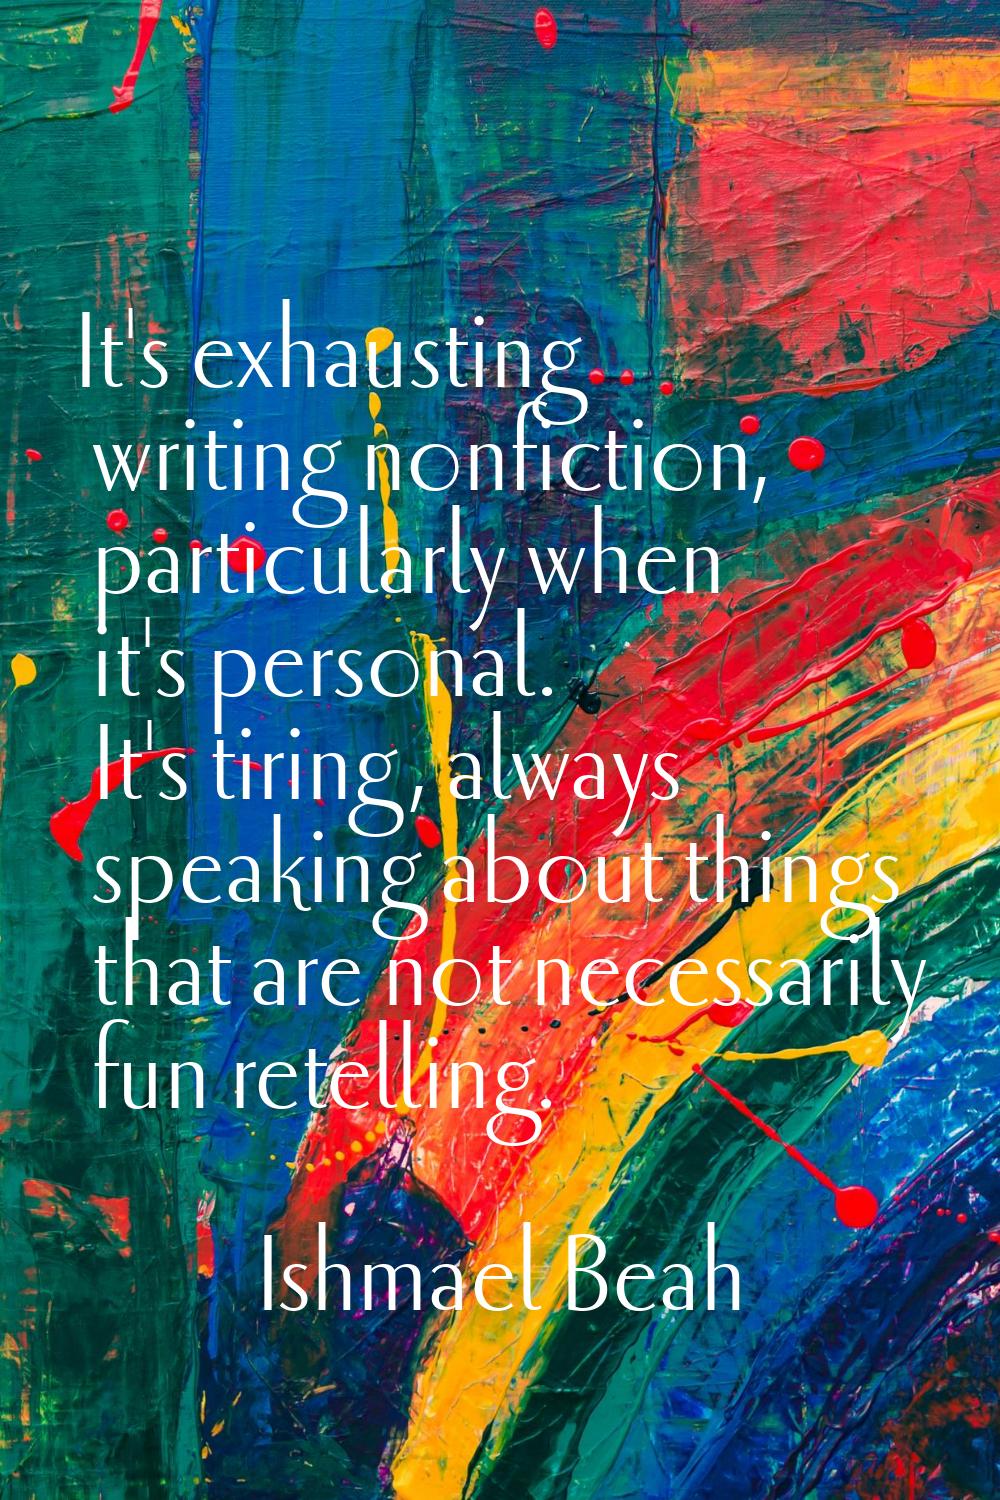 It's exhausting writing nonfiction, particularly when it's personal. It's tiring, always speaking a